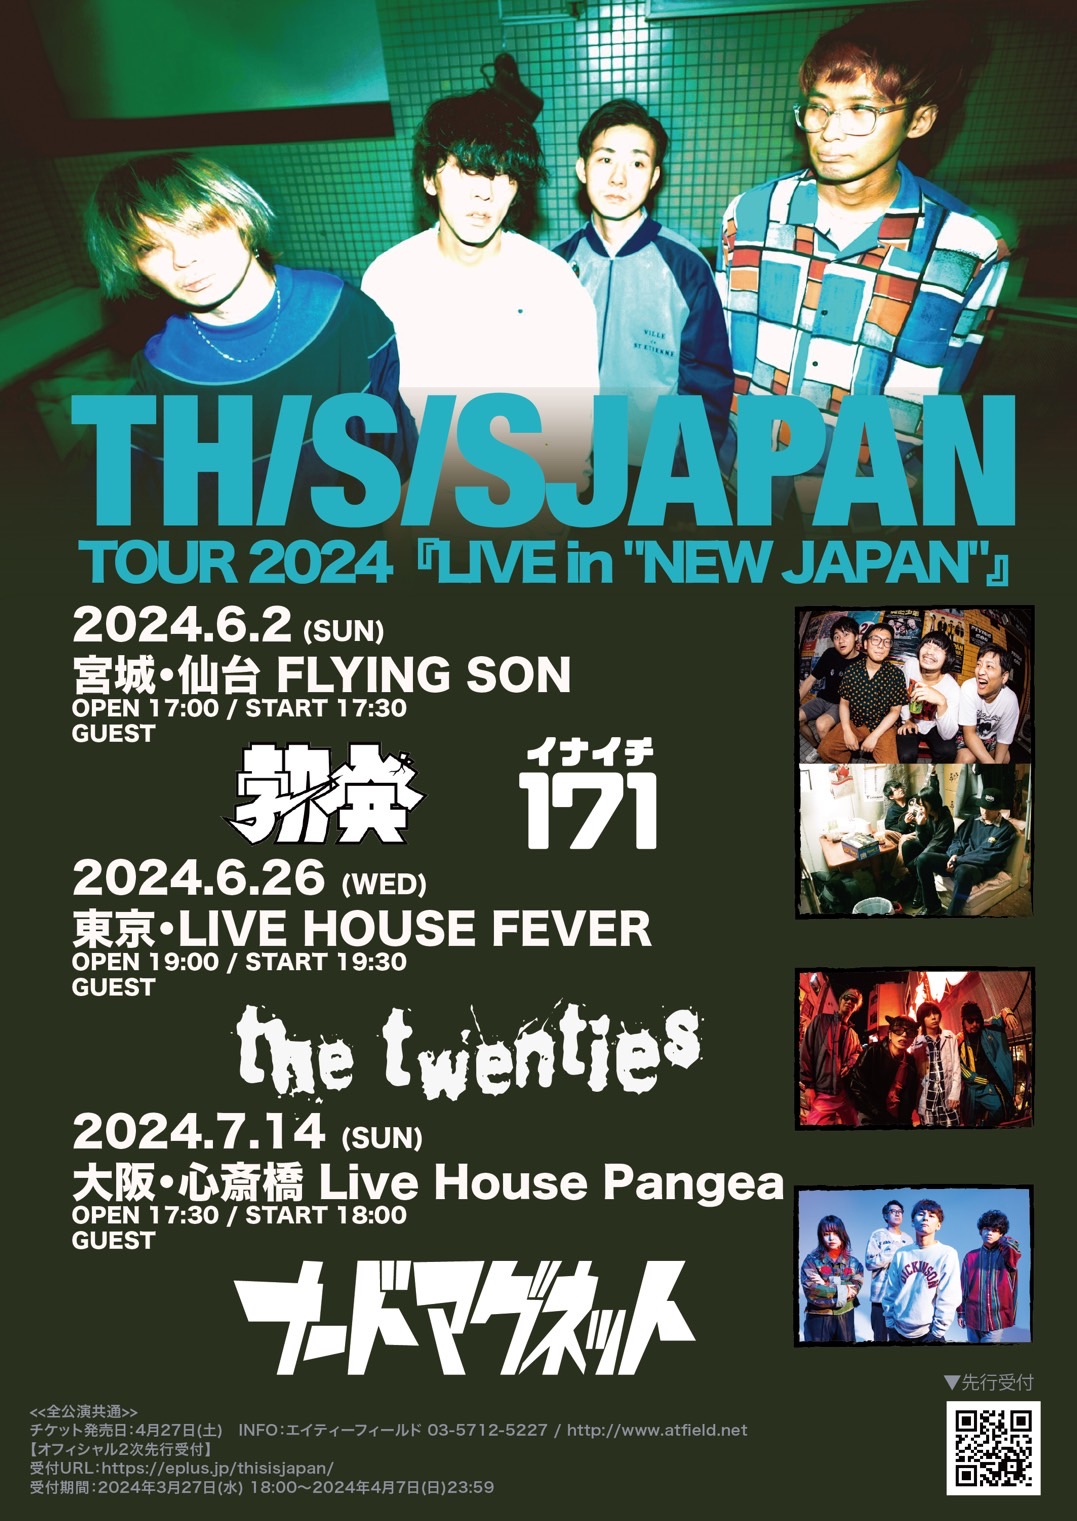 TOUR 2024『LIVE in "NEW JAPAN"』